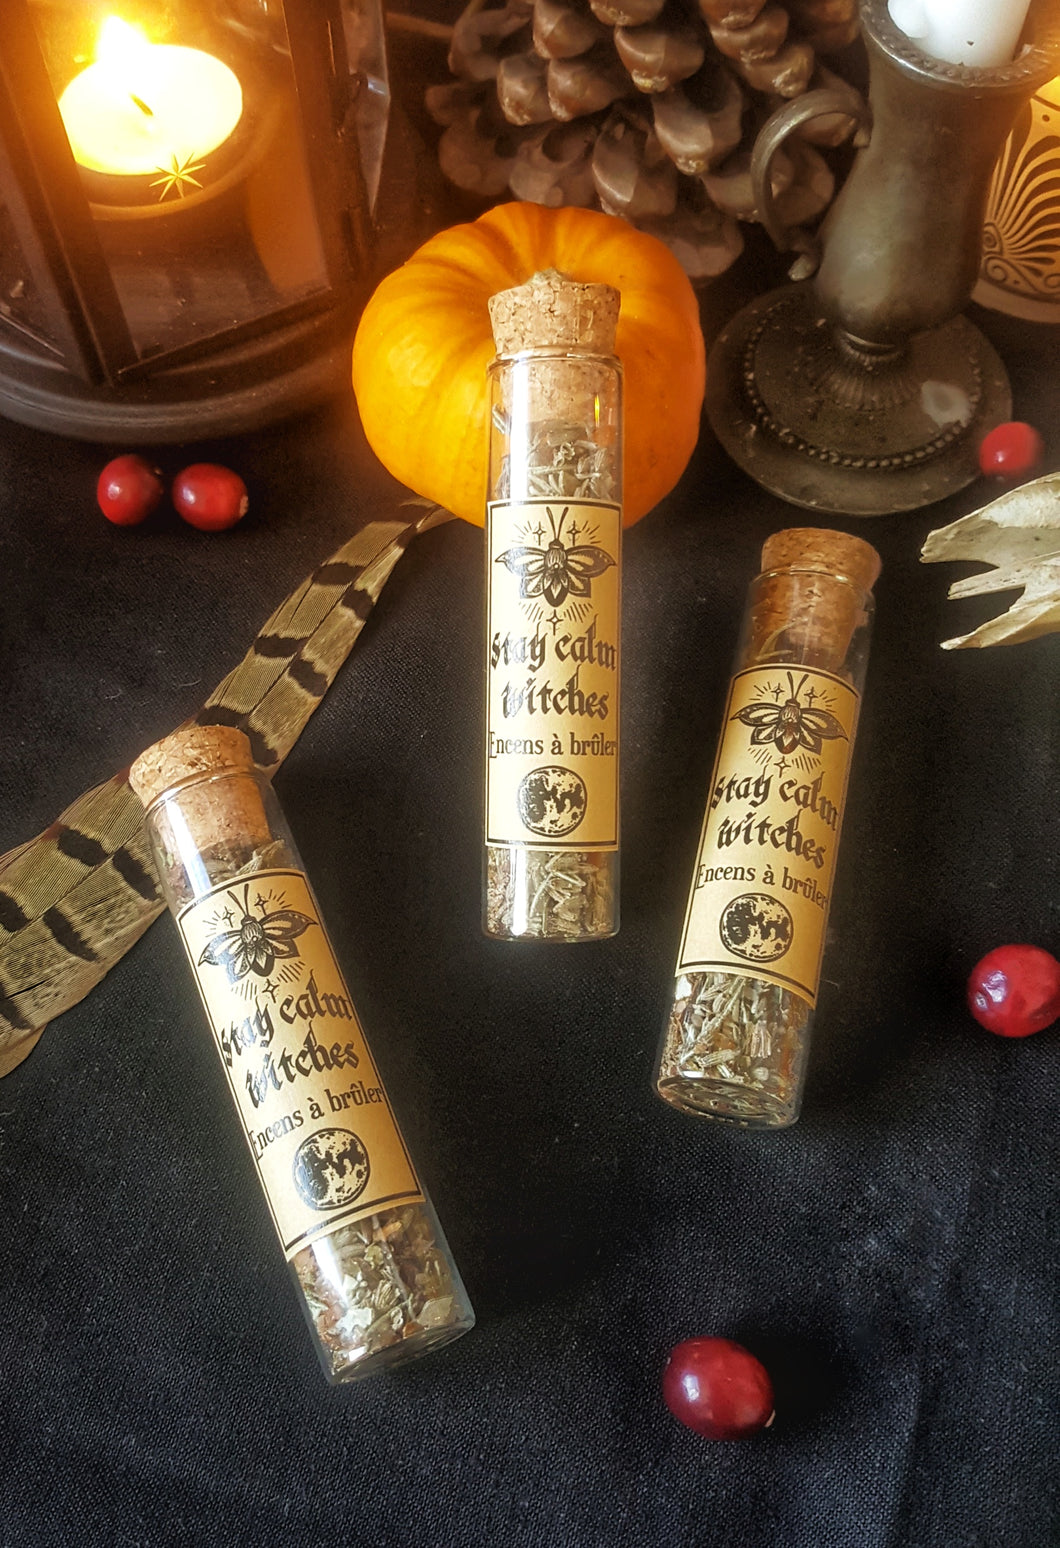 Stay Calm Witches Incense Grains